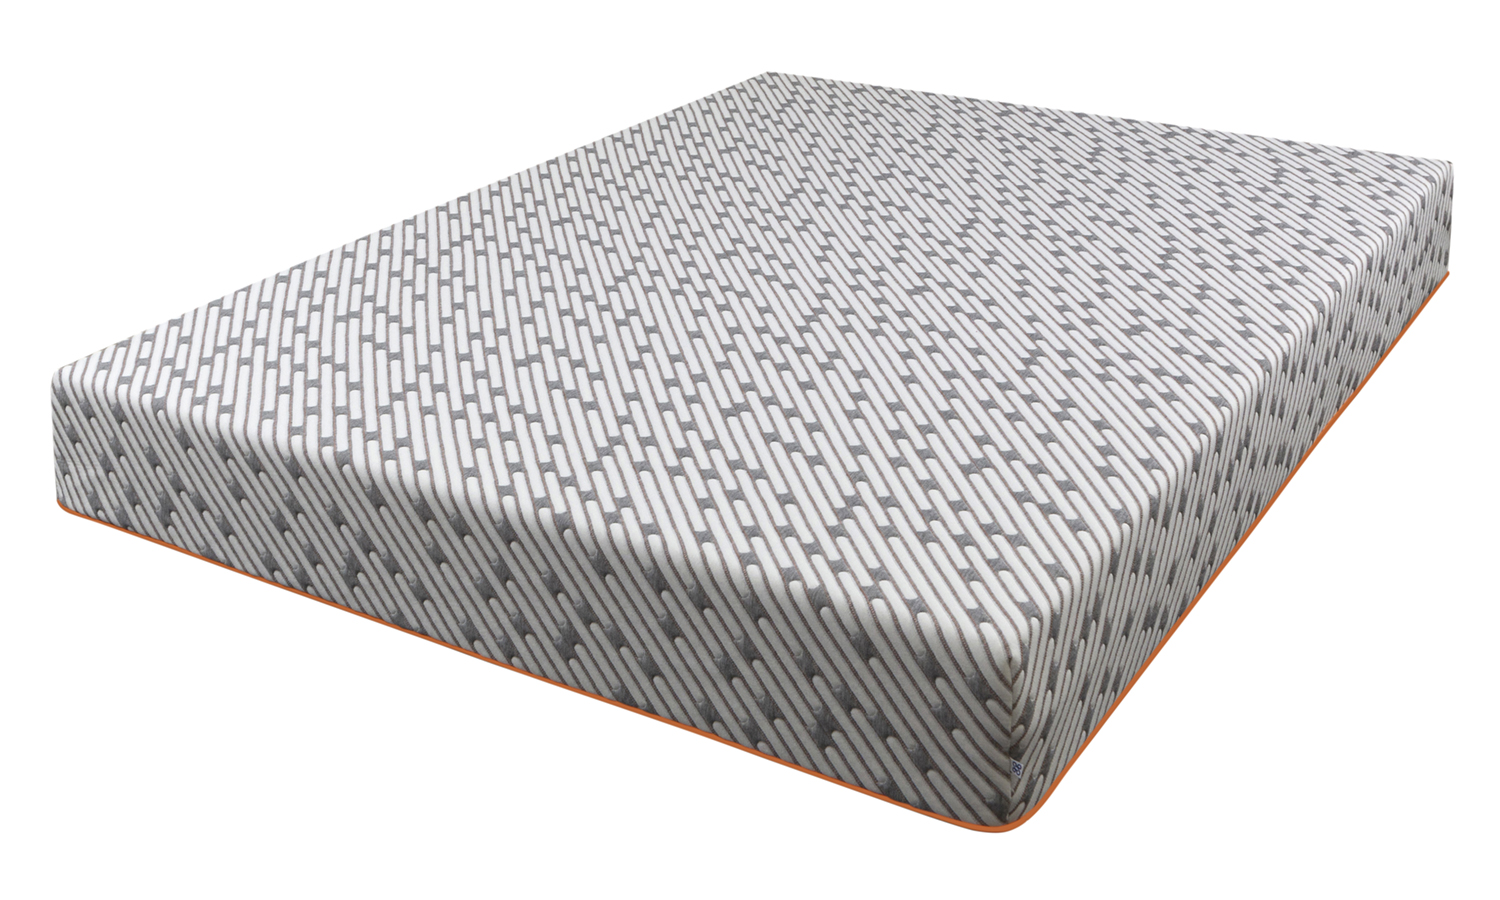 rehovot mattress covers for sale